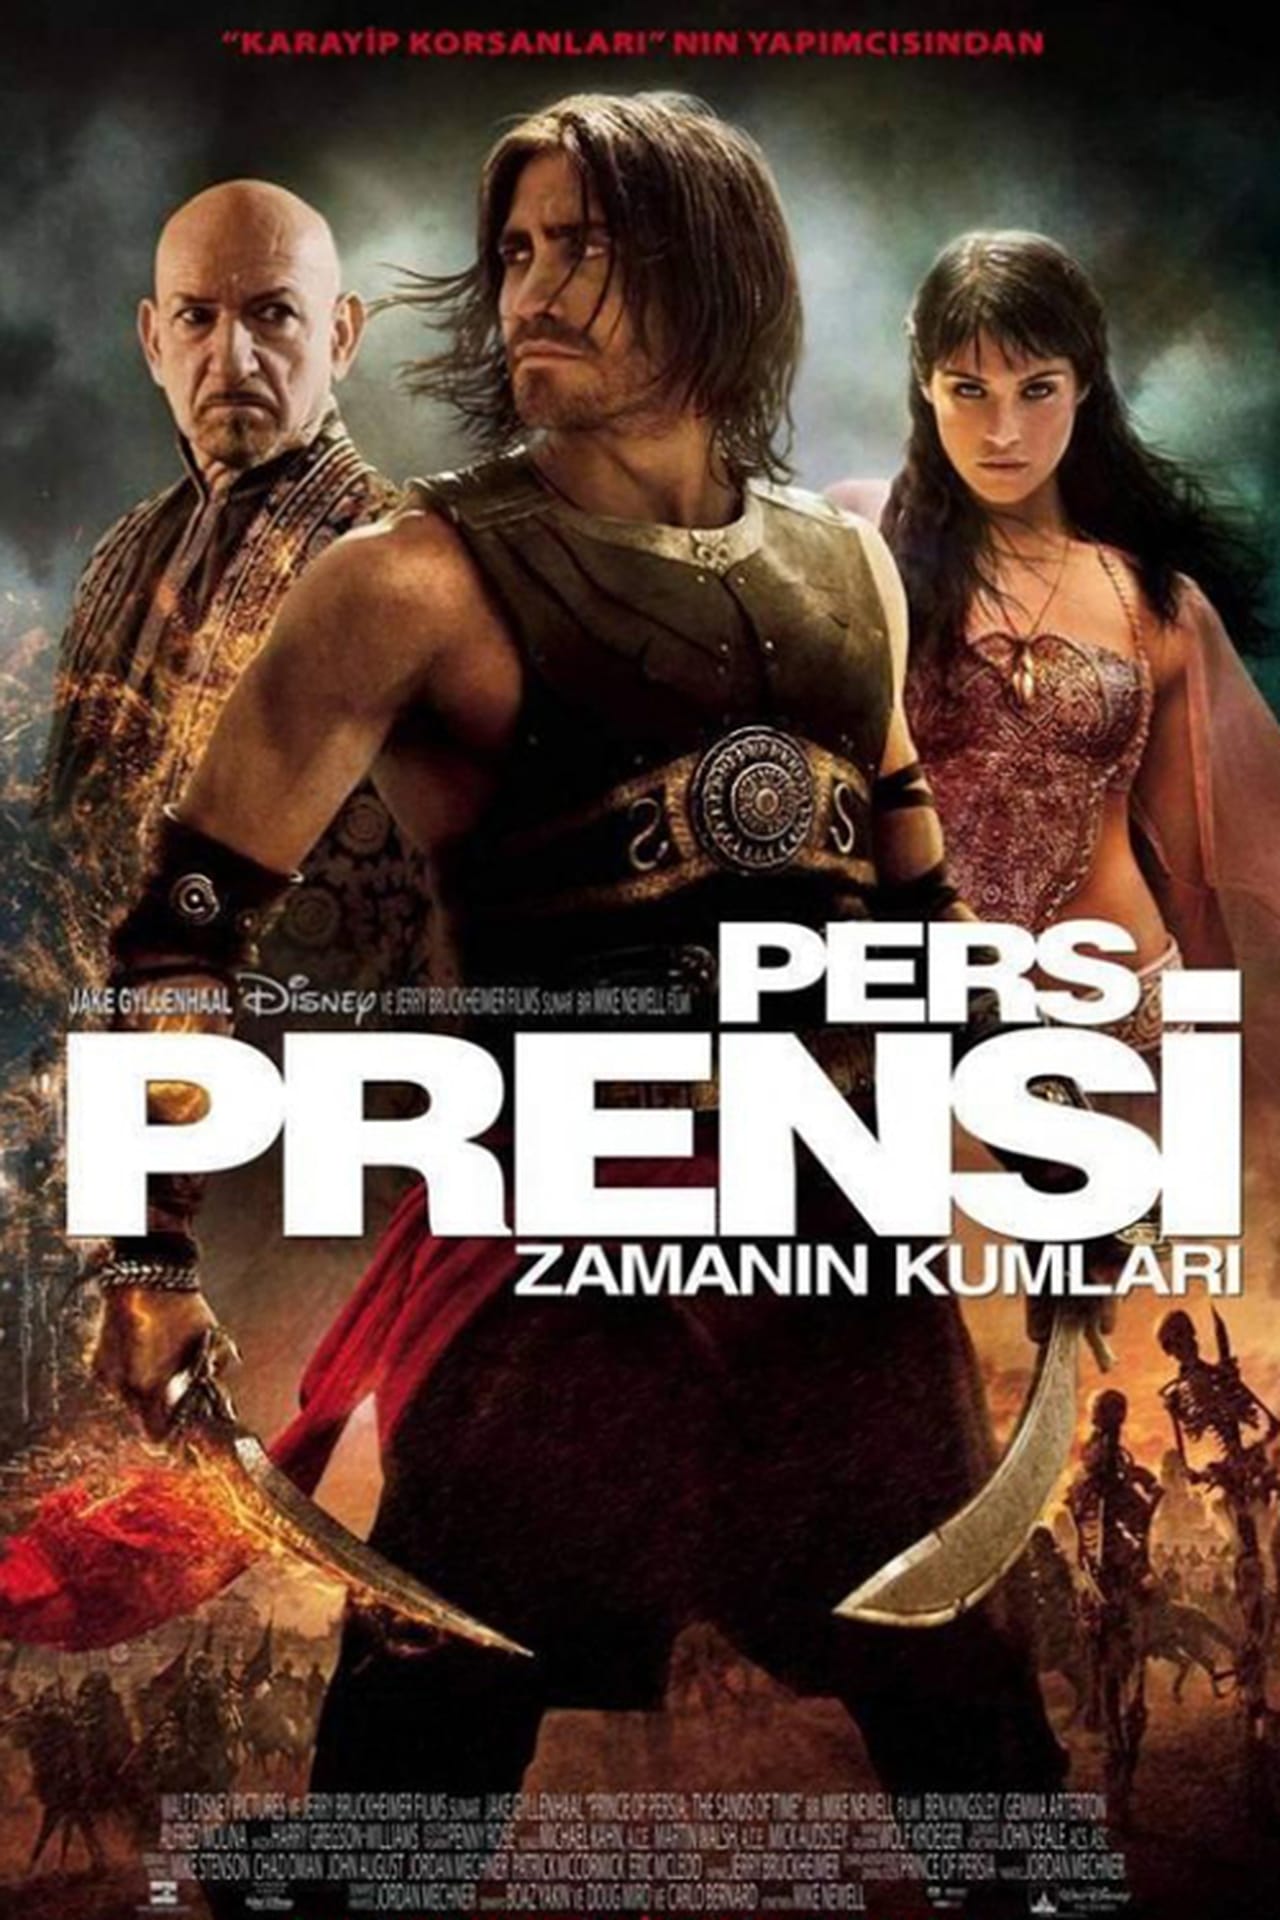 Prince of Persia: The Sands of Time (2010) 256Kbps 23.976Fps 48Khz 5.1Ch Disney+ DD+ E-AC3 Turkish Audio TAC